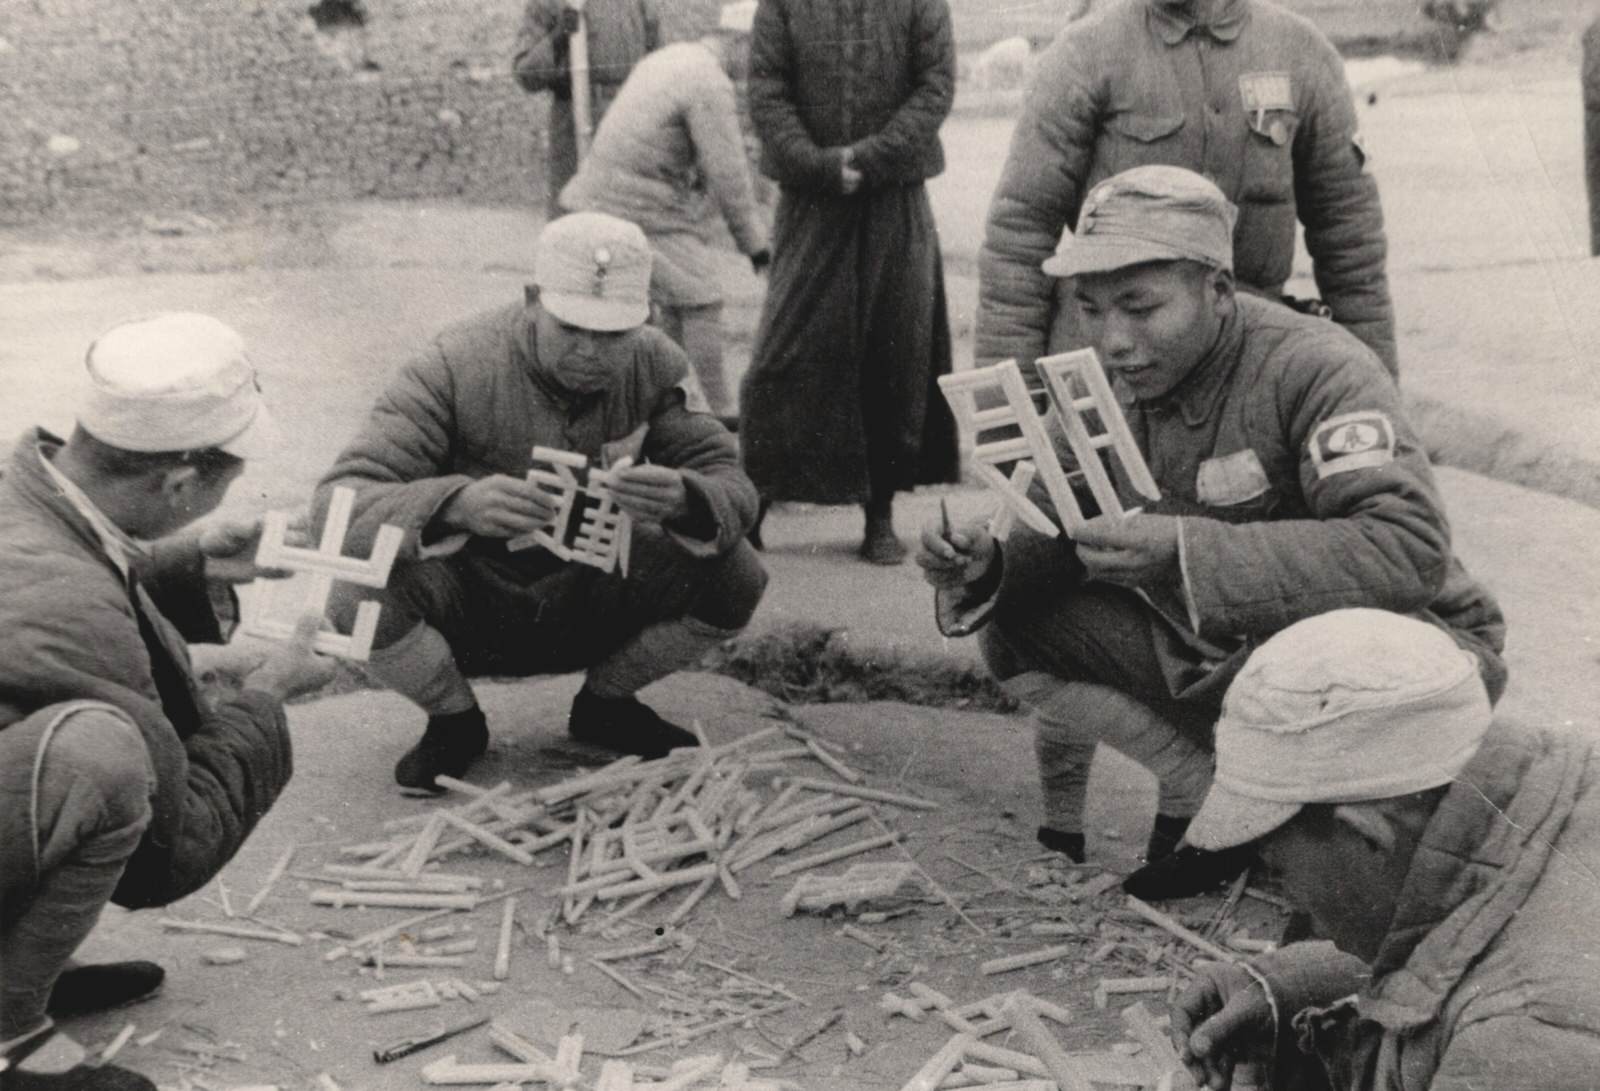 Soldiers of the 84th Kwangsi (Guangxi) Army at Tsaoyang (Zaoyang), Hupeh (Hubei) Province, Central China front, carve Chinese characters (words) out of bamboo and put up slogans against the Japanese.